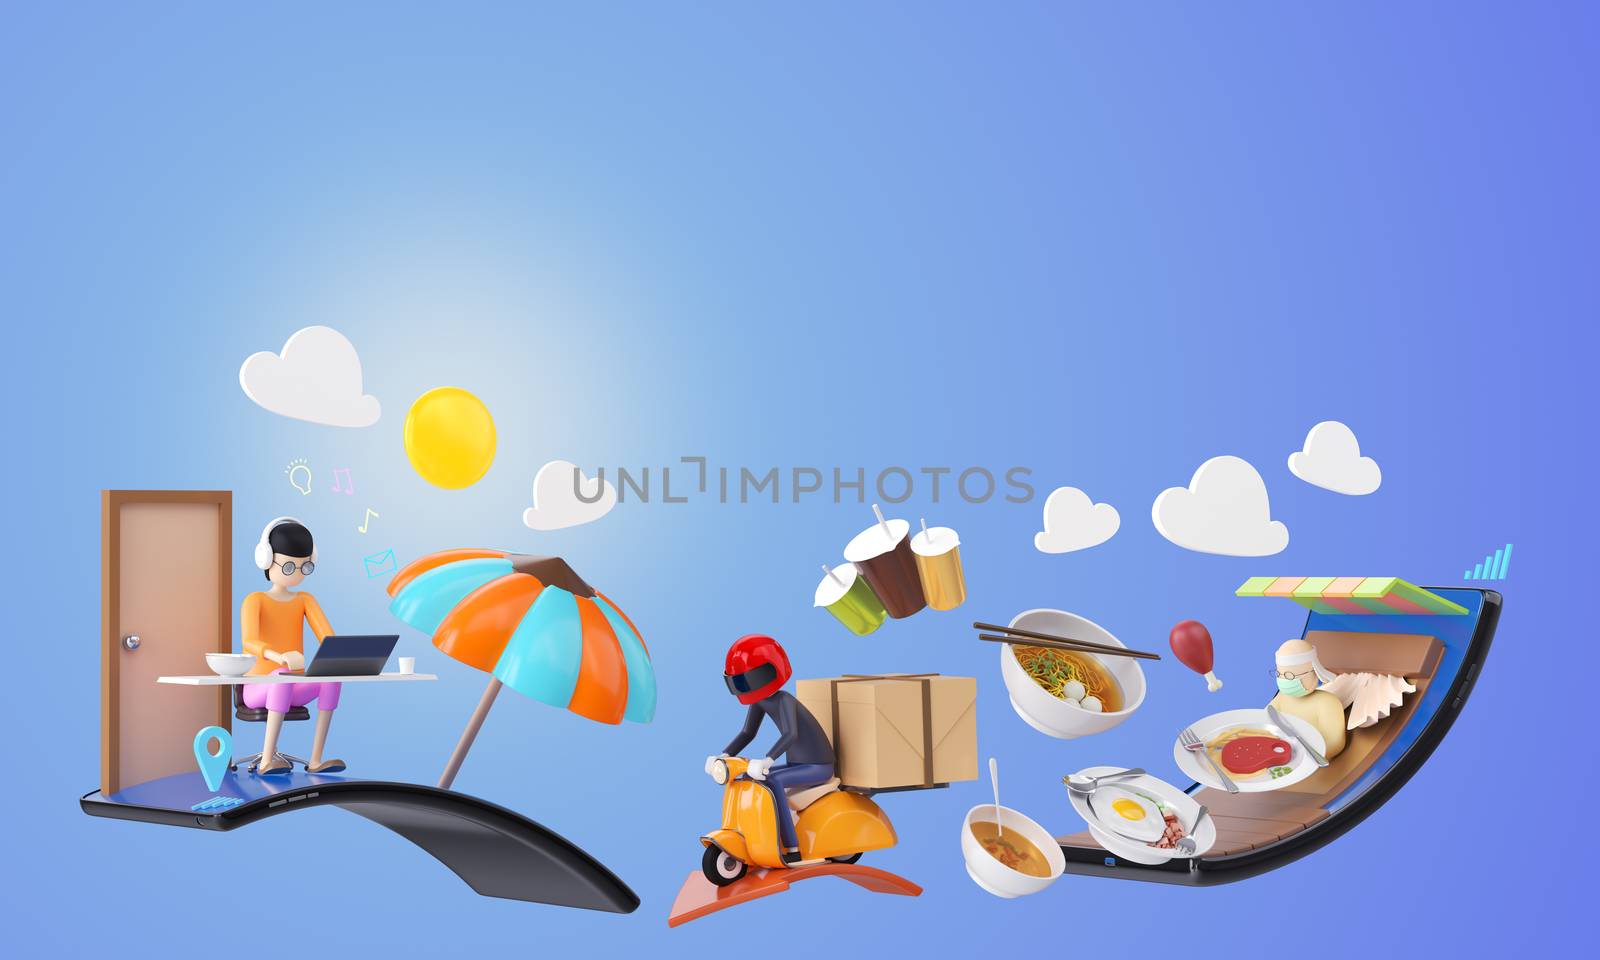 food menu order online from smartphone. delivery man carrier deliver to customer. restaurant application mobile phone. man work from home with laptop. clipping path inside 3D illustrator